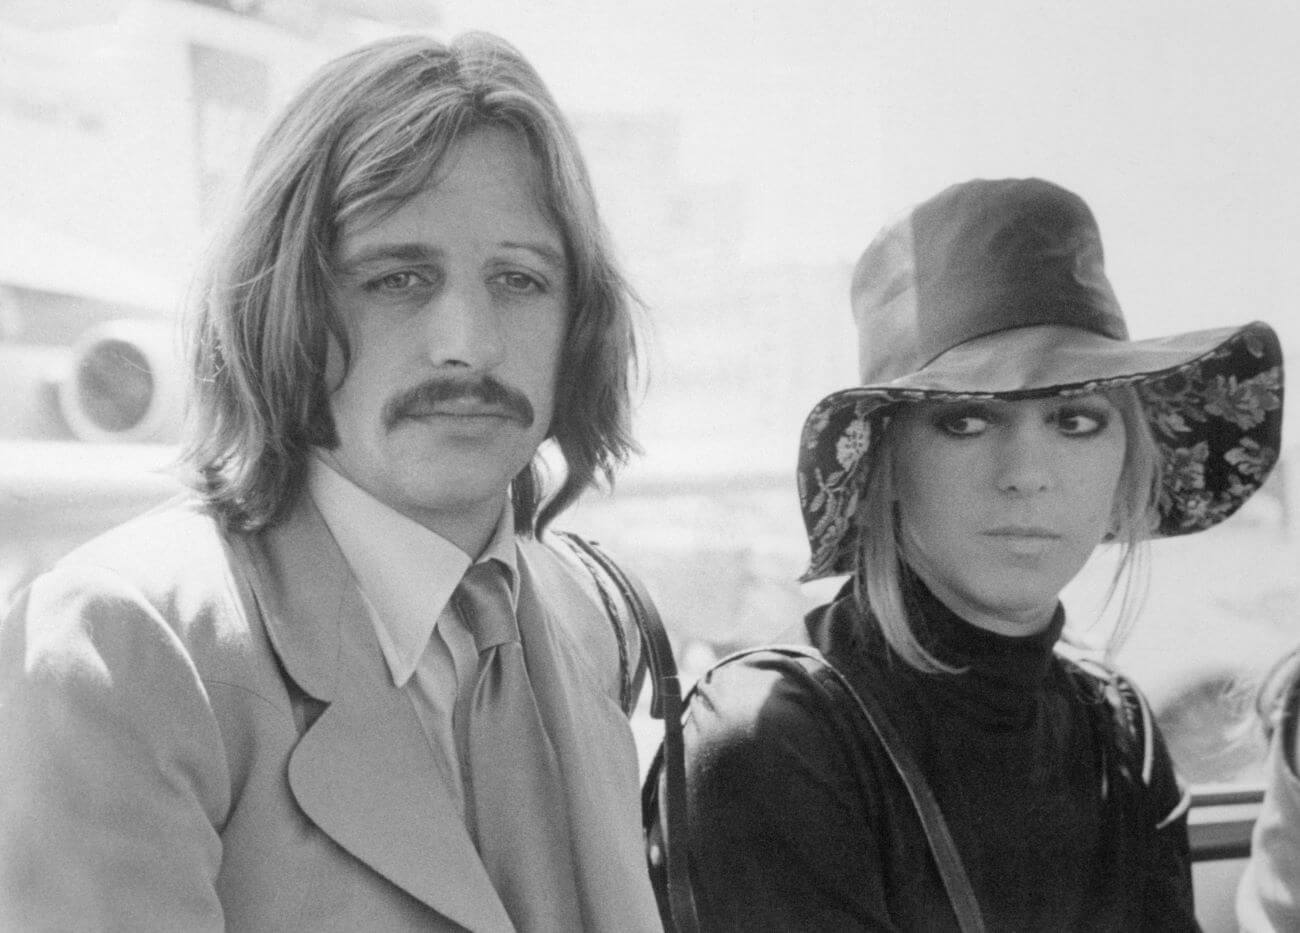 A black and white picture of Ringo Starr sitting next to his wife, Maureen Starkey, who wears a hat.